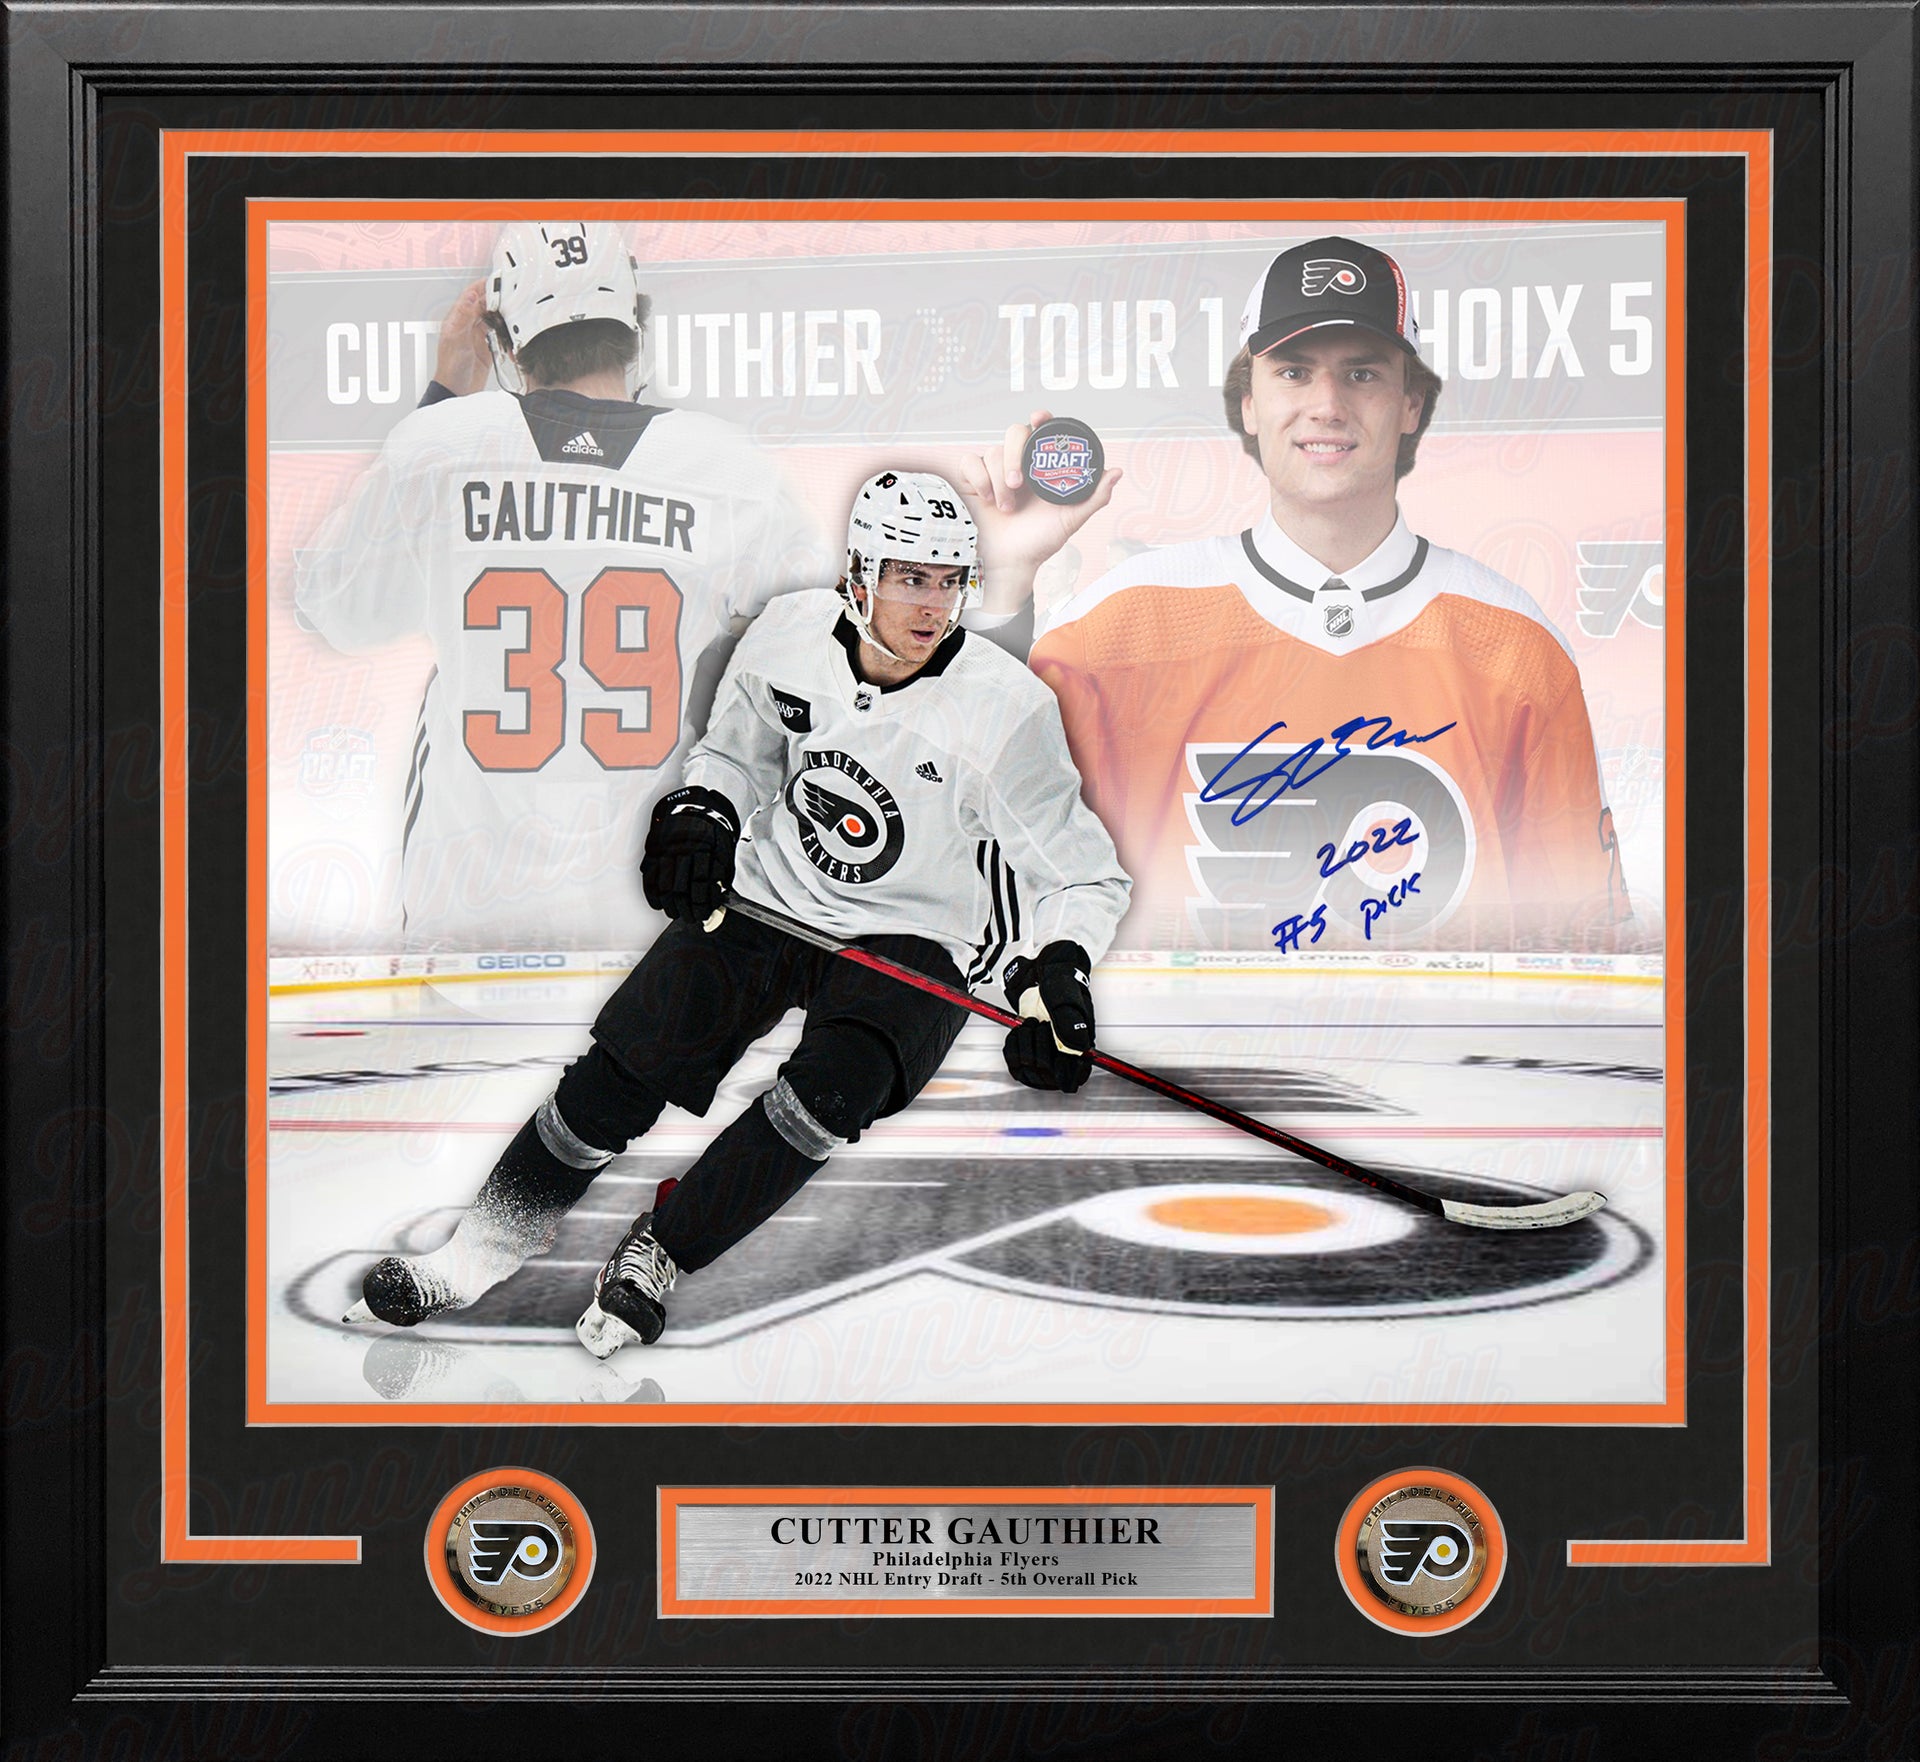 Cutter Gauthier Philadelphia Flyers Autographed 16x20 Framed Draft Hockey Photo Inscribed #5 Pick - Dynasty Sports & Framing 